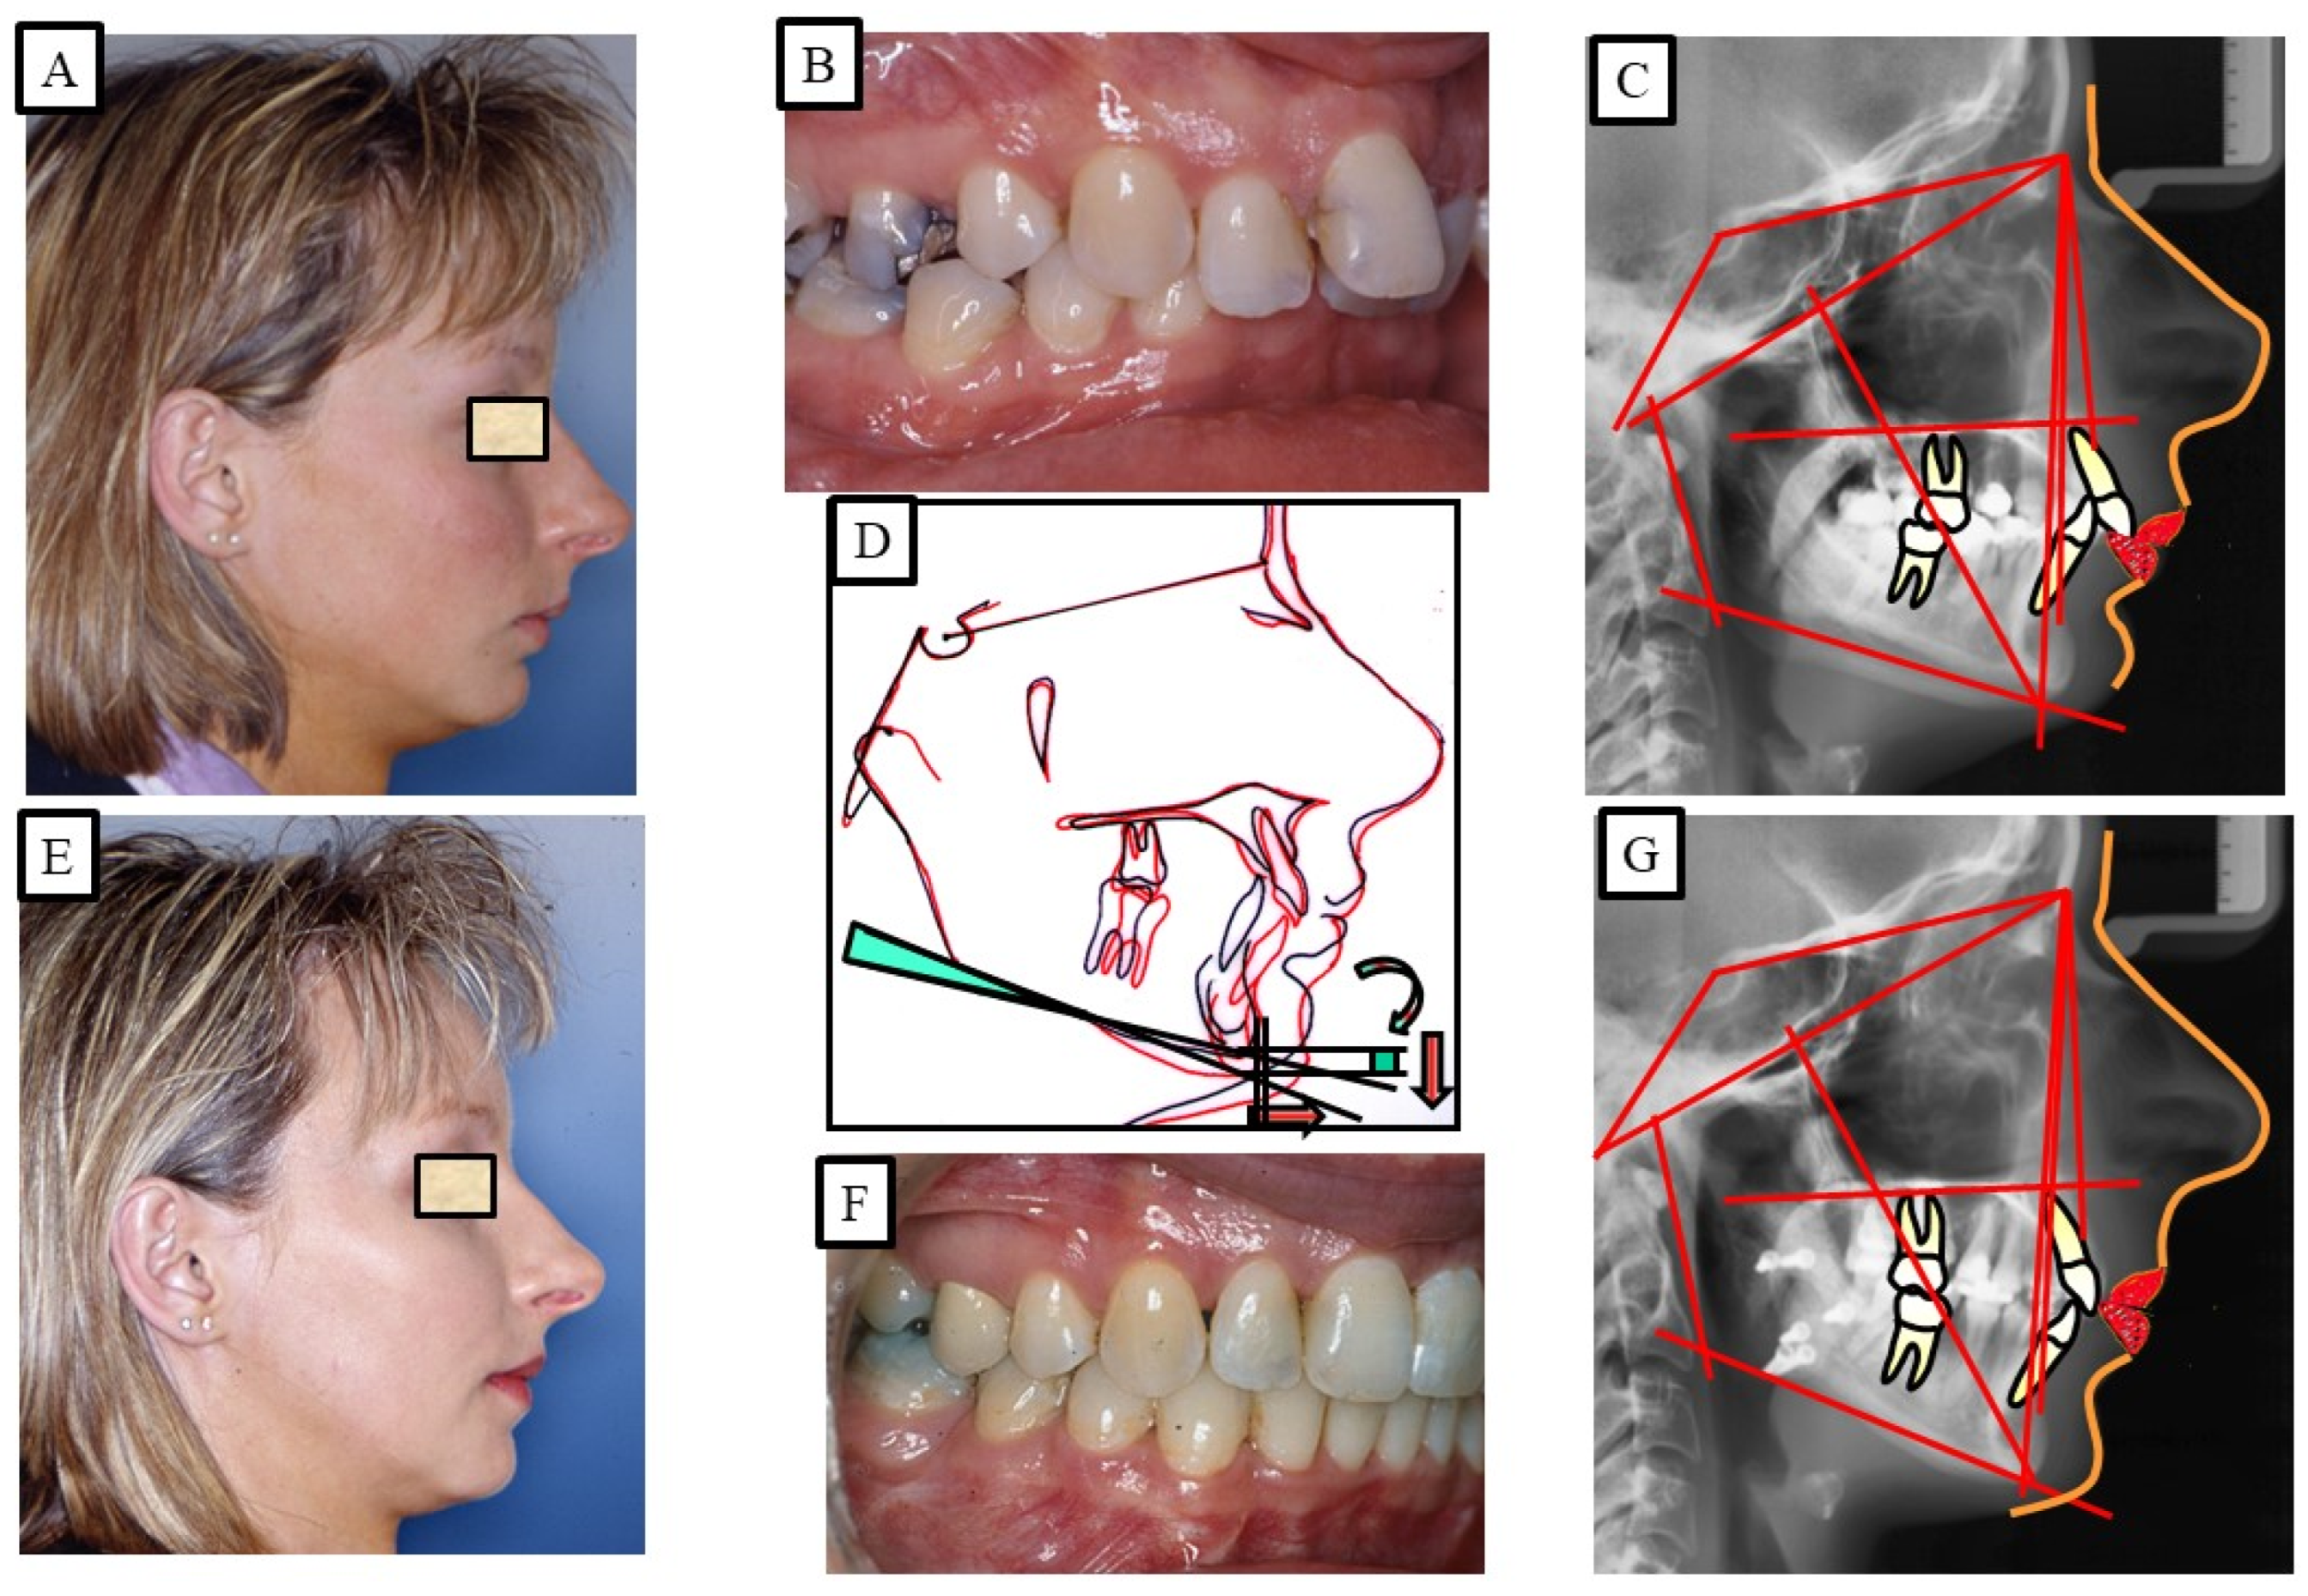 Adult patient with Class II, Div. 2 malocclusion and collapse of